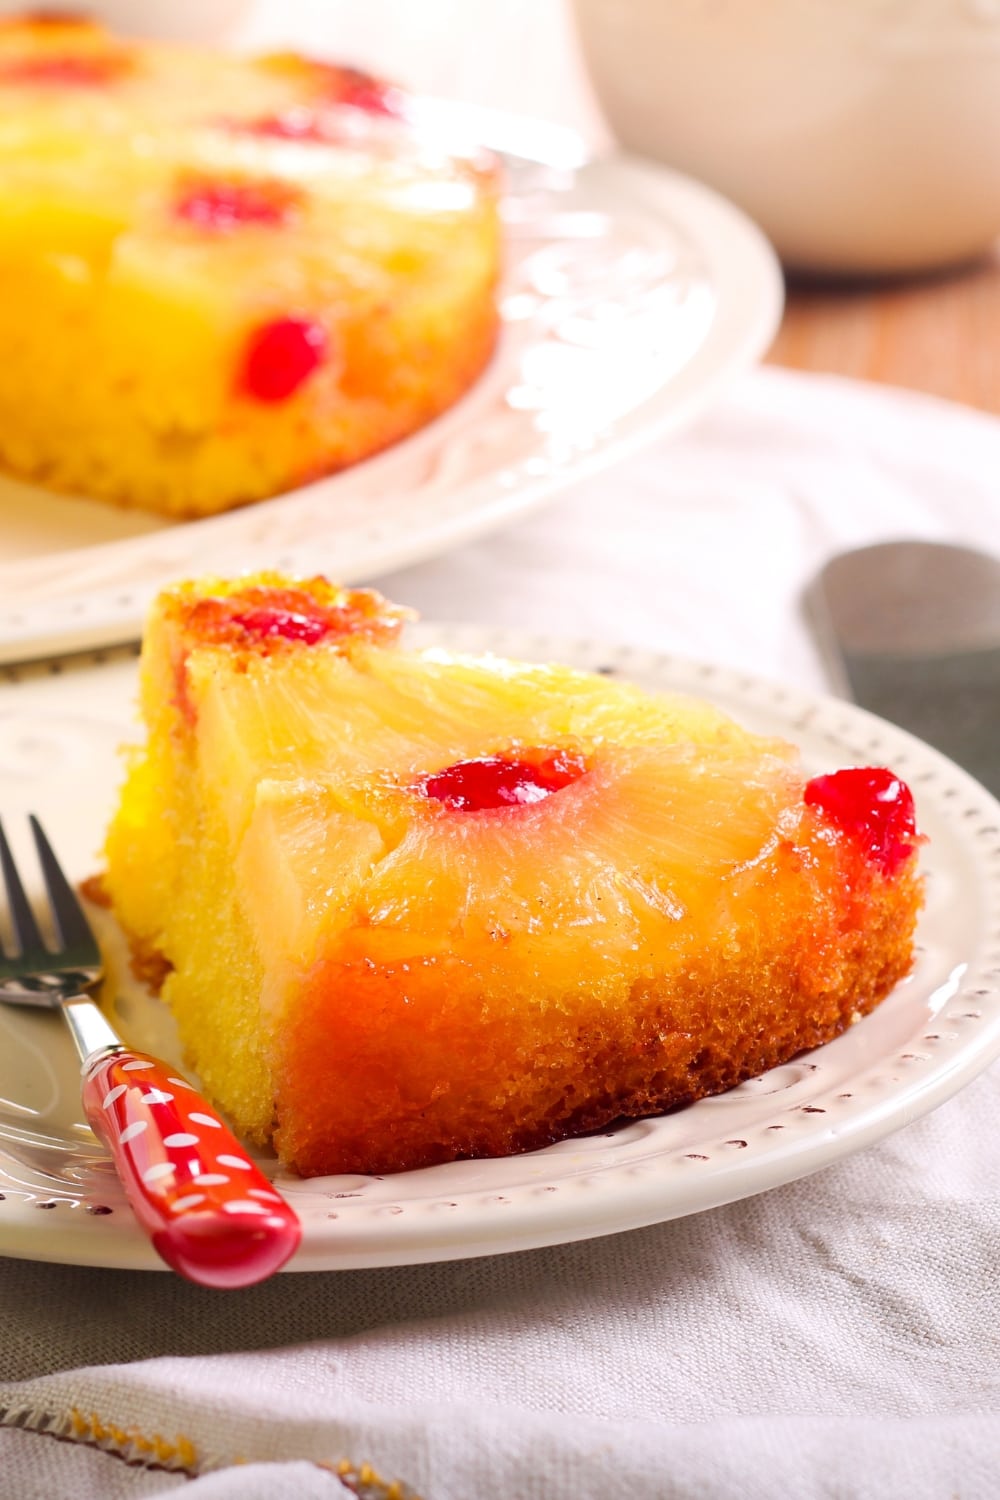 A Slice of Pineapple Upside Down Cake with Cherries